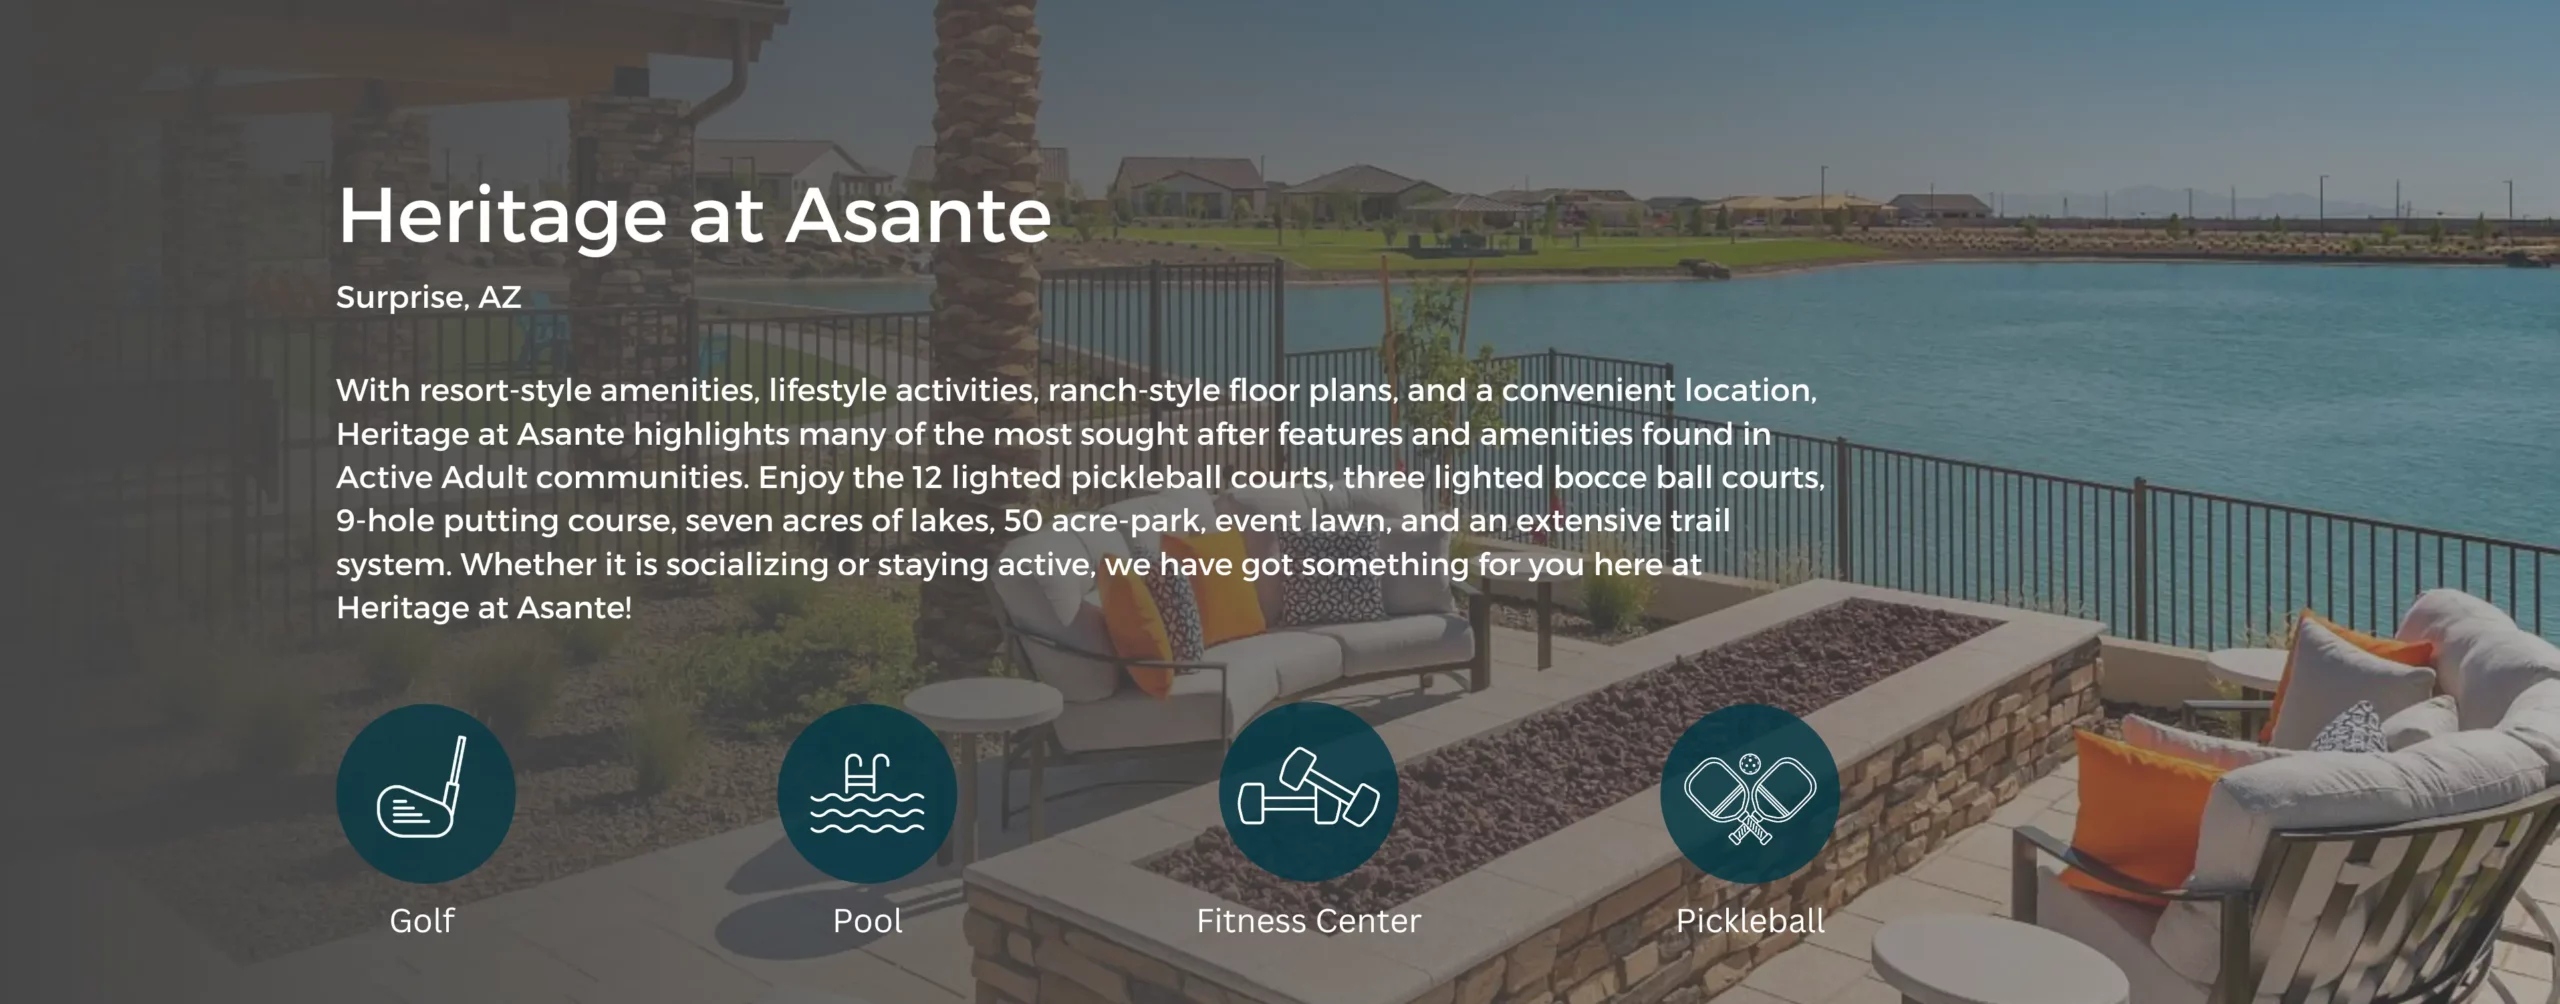 Icons that show Golf, Pool, Fitness Center, and Pickleball. Background image is an outdoor patio and firepit.